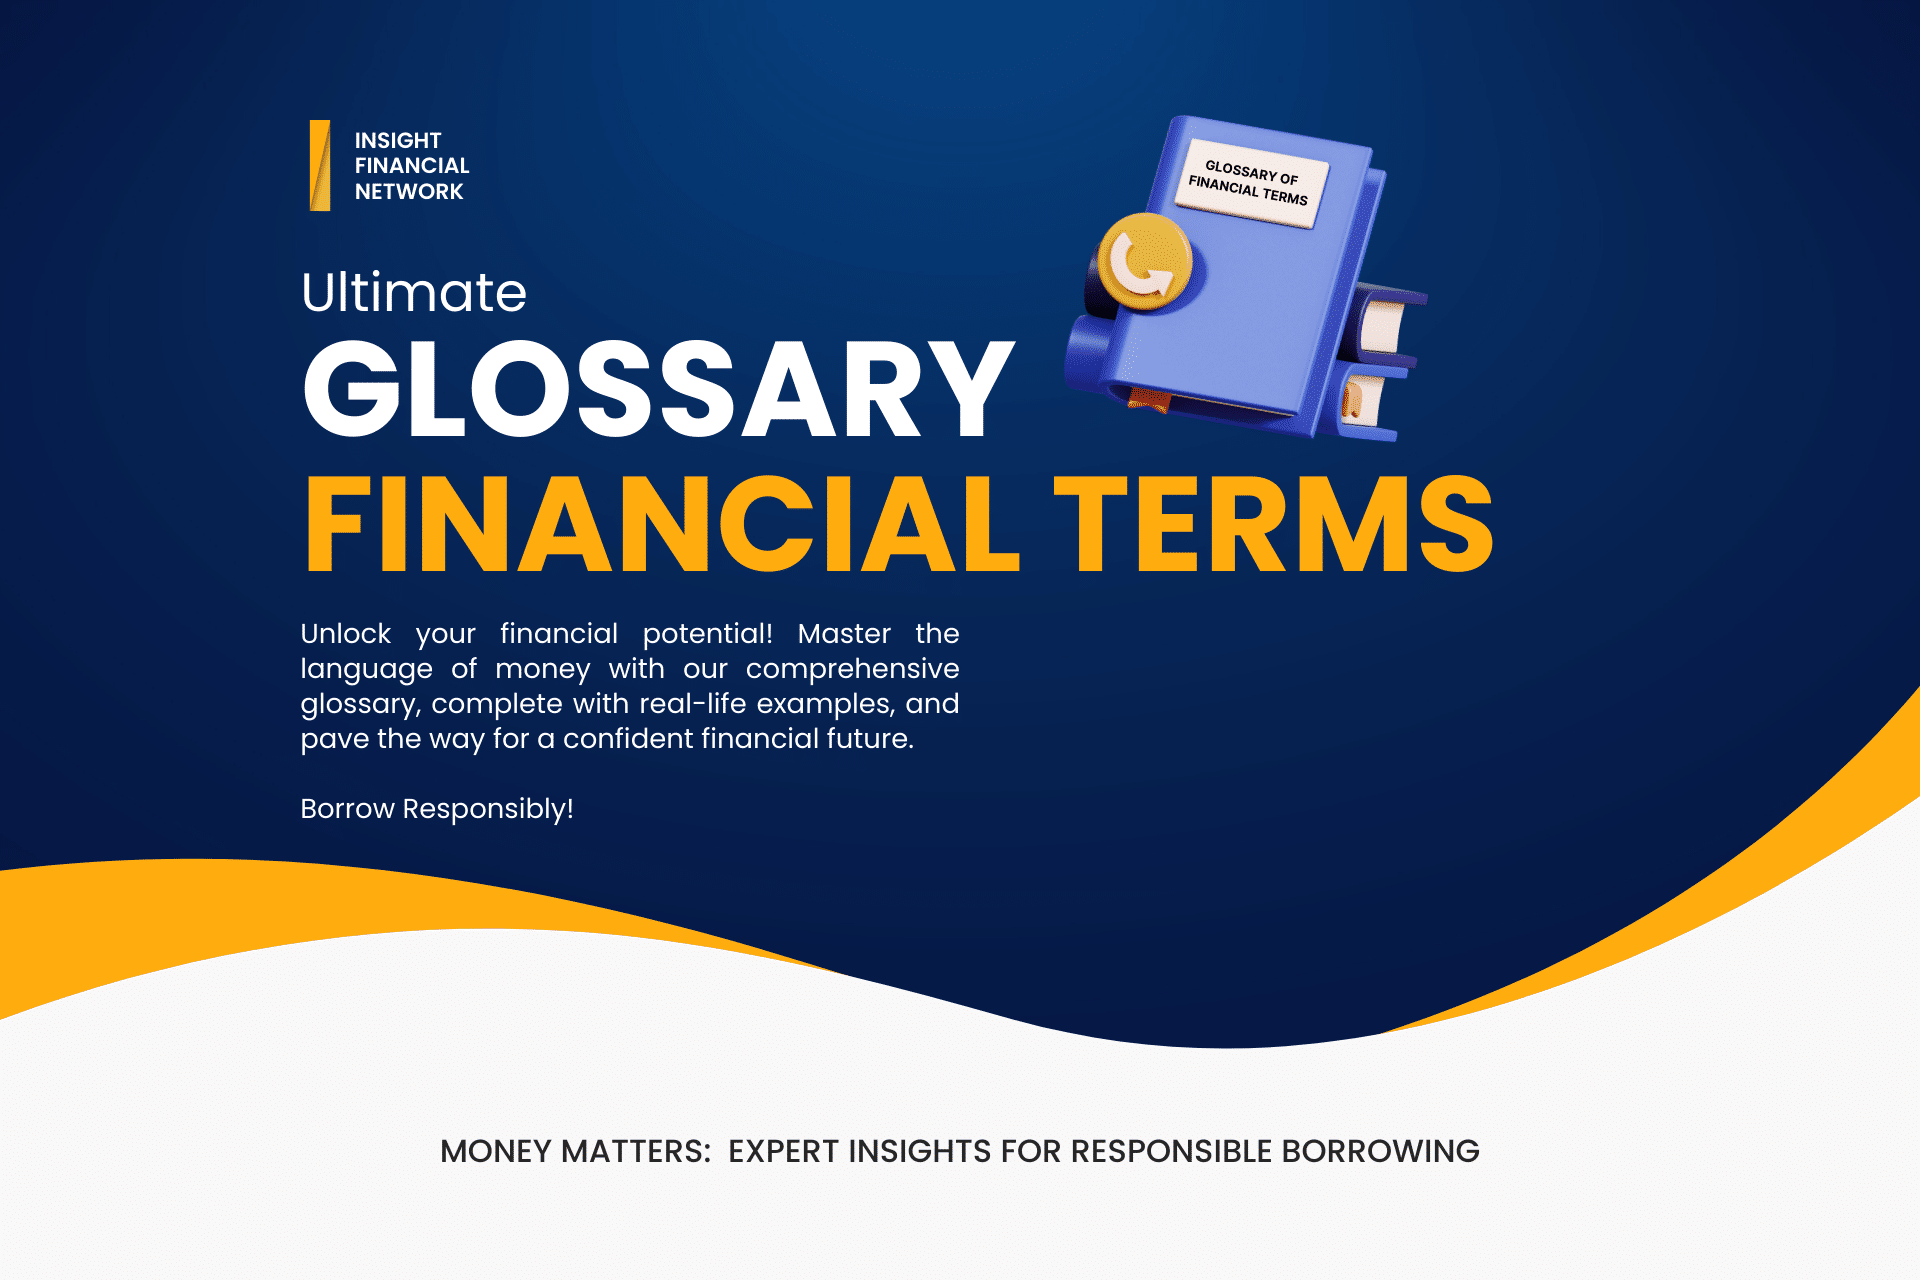 Glossary of Financial Terms